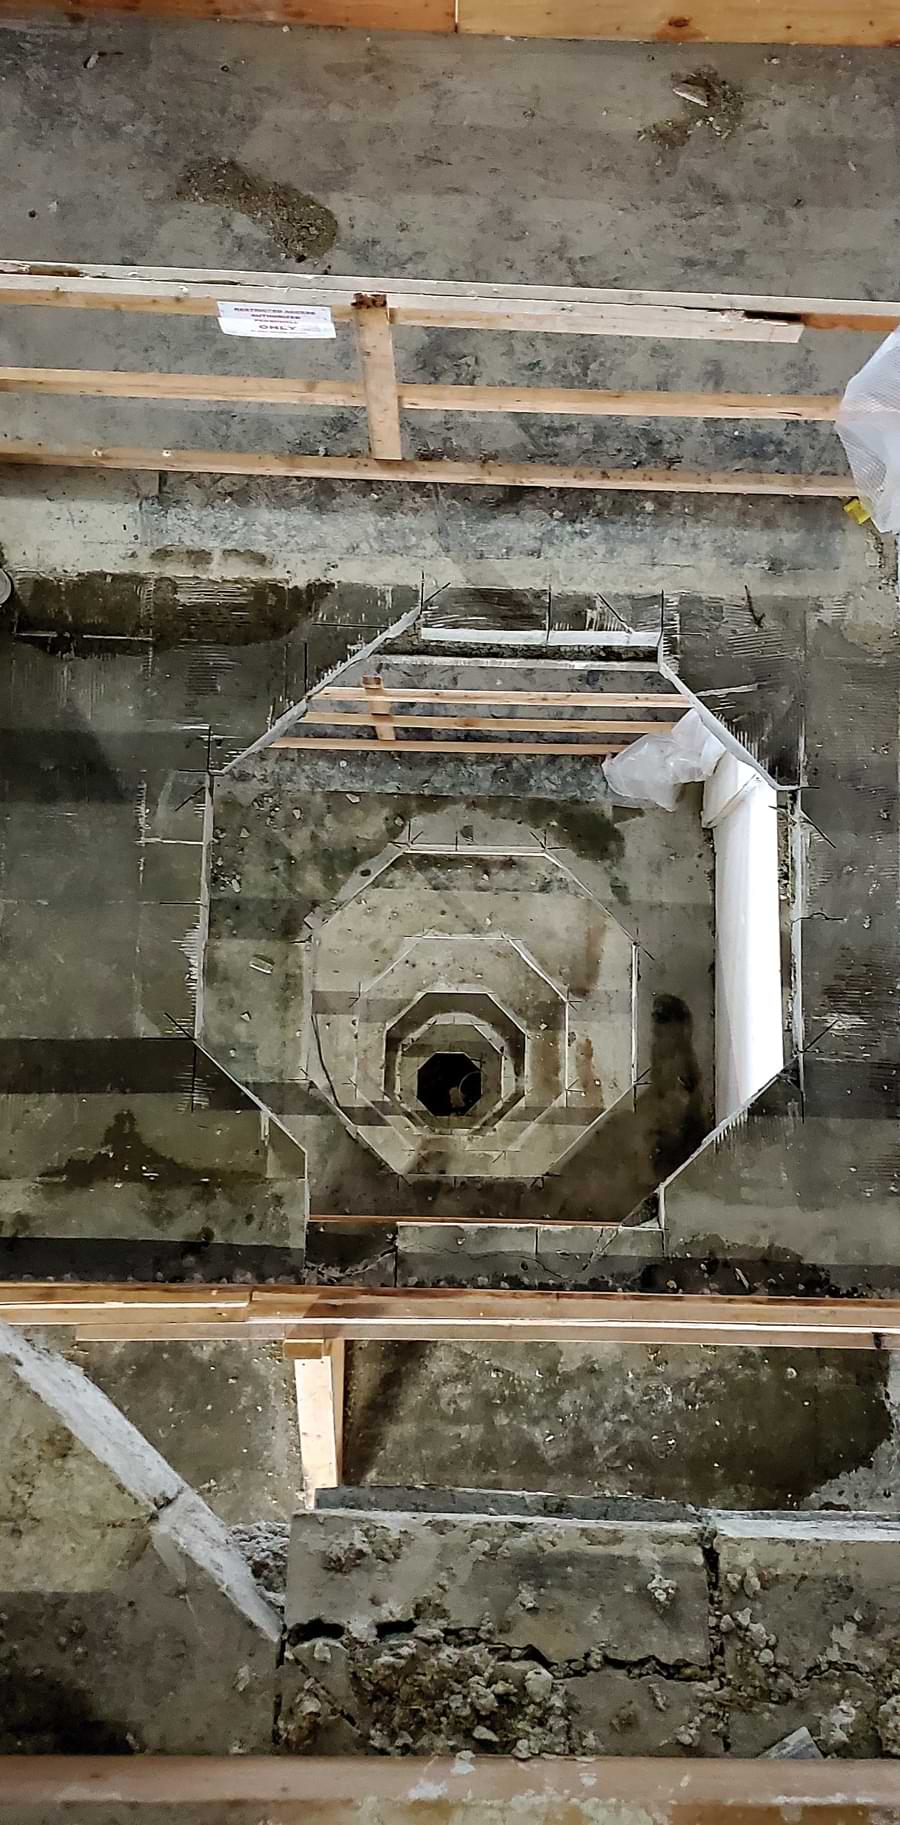 Looking down between the two core elevators, a wider rising air duct is being installed to service the enlarged interior volume.